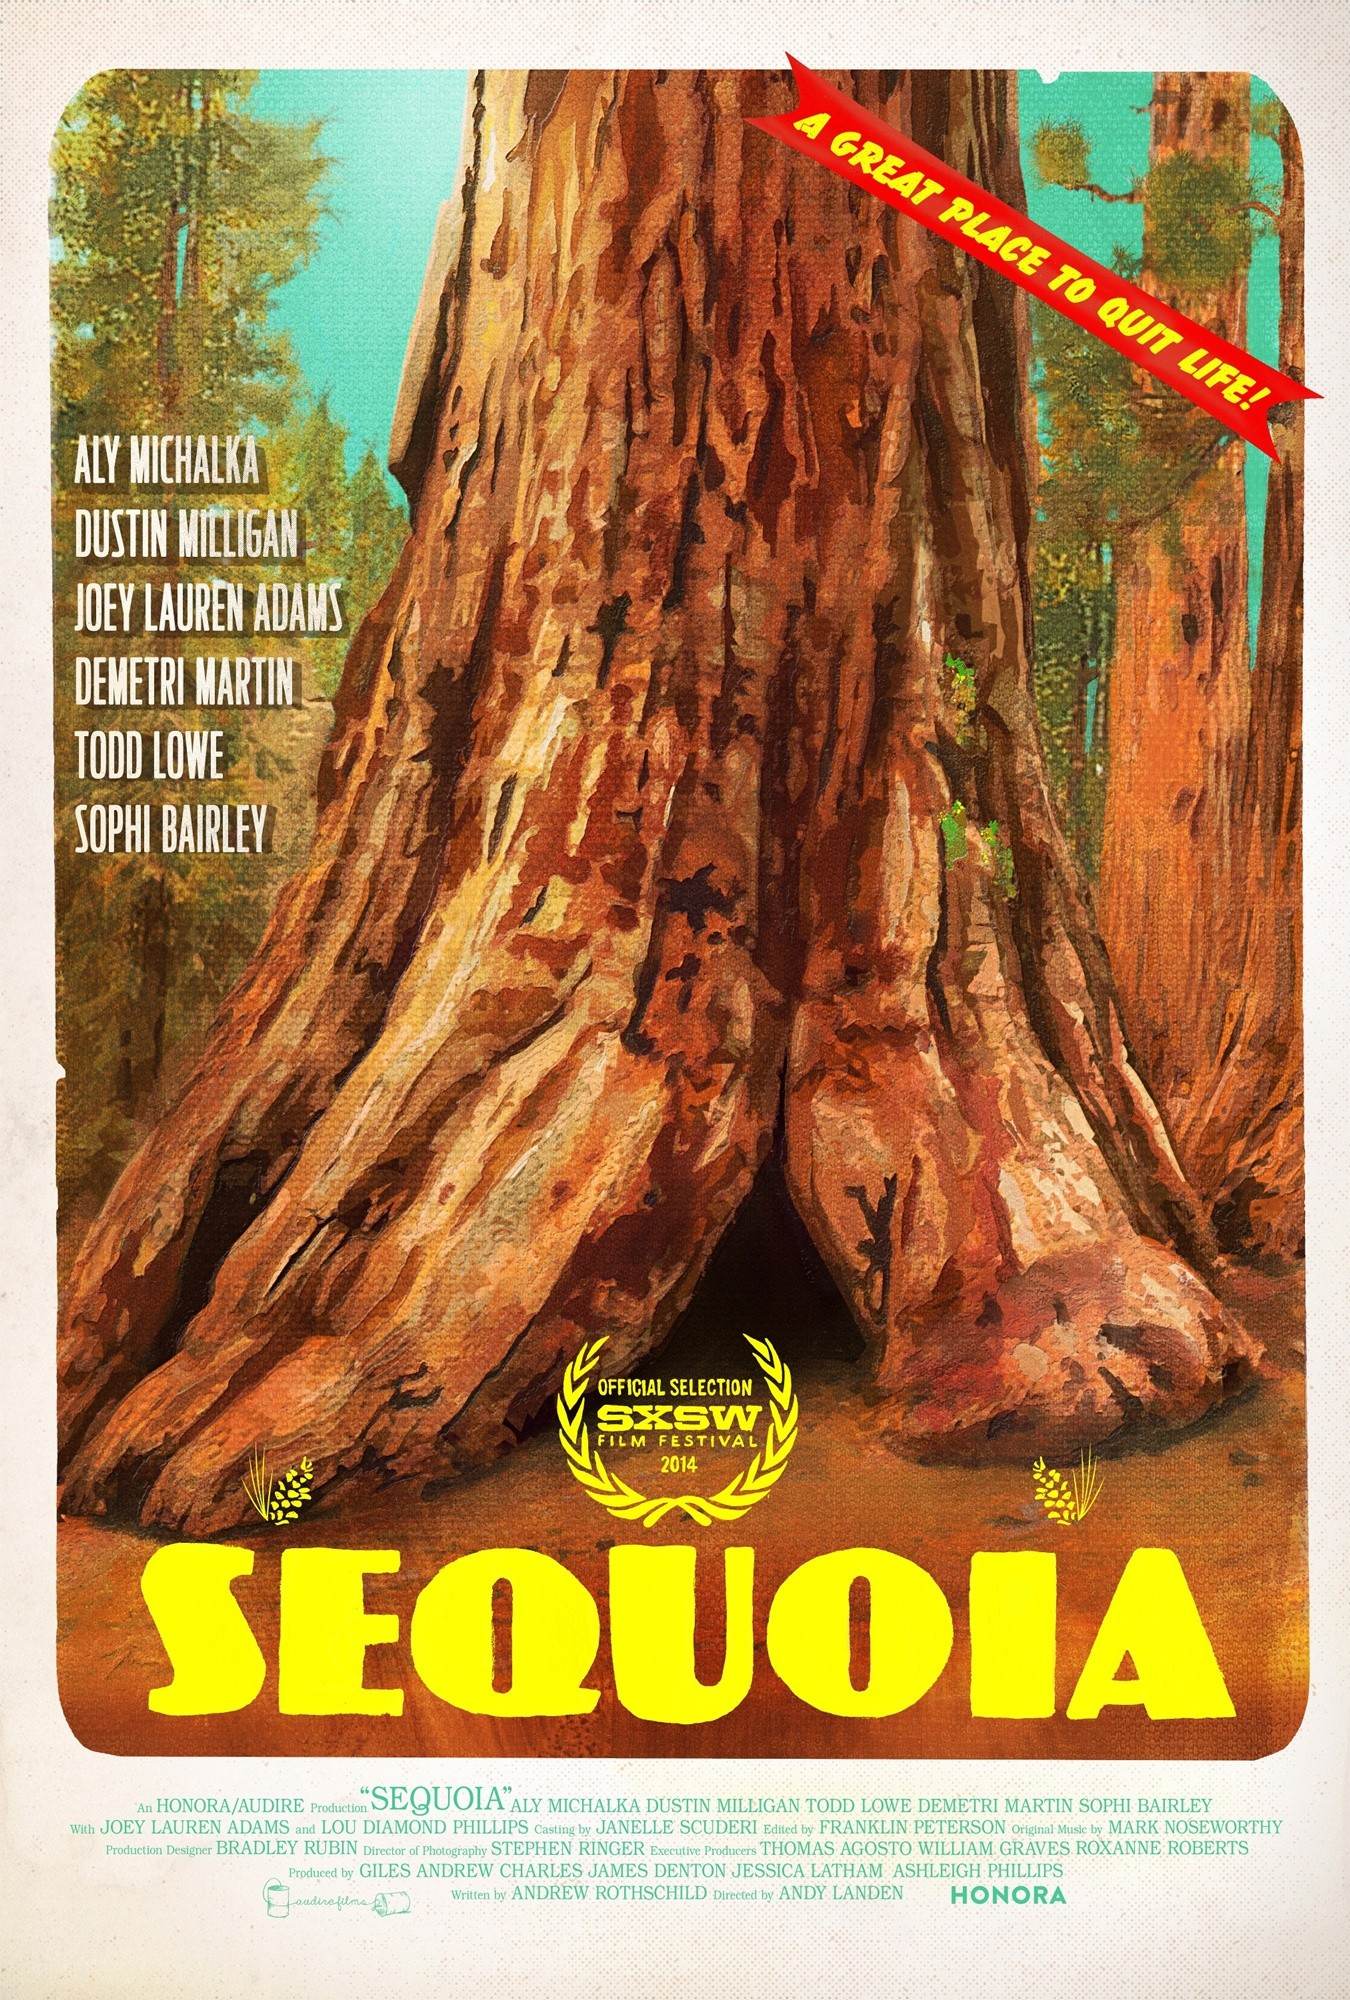 Poster of The Orchard's Sequoia (2015)